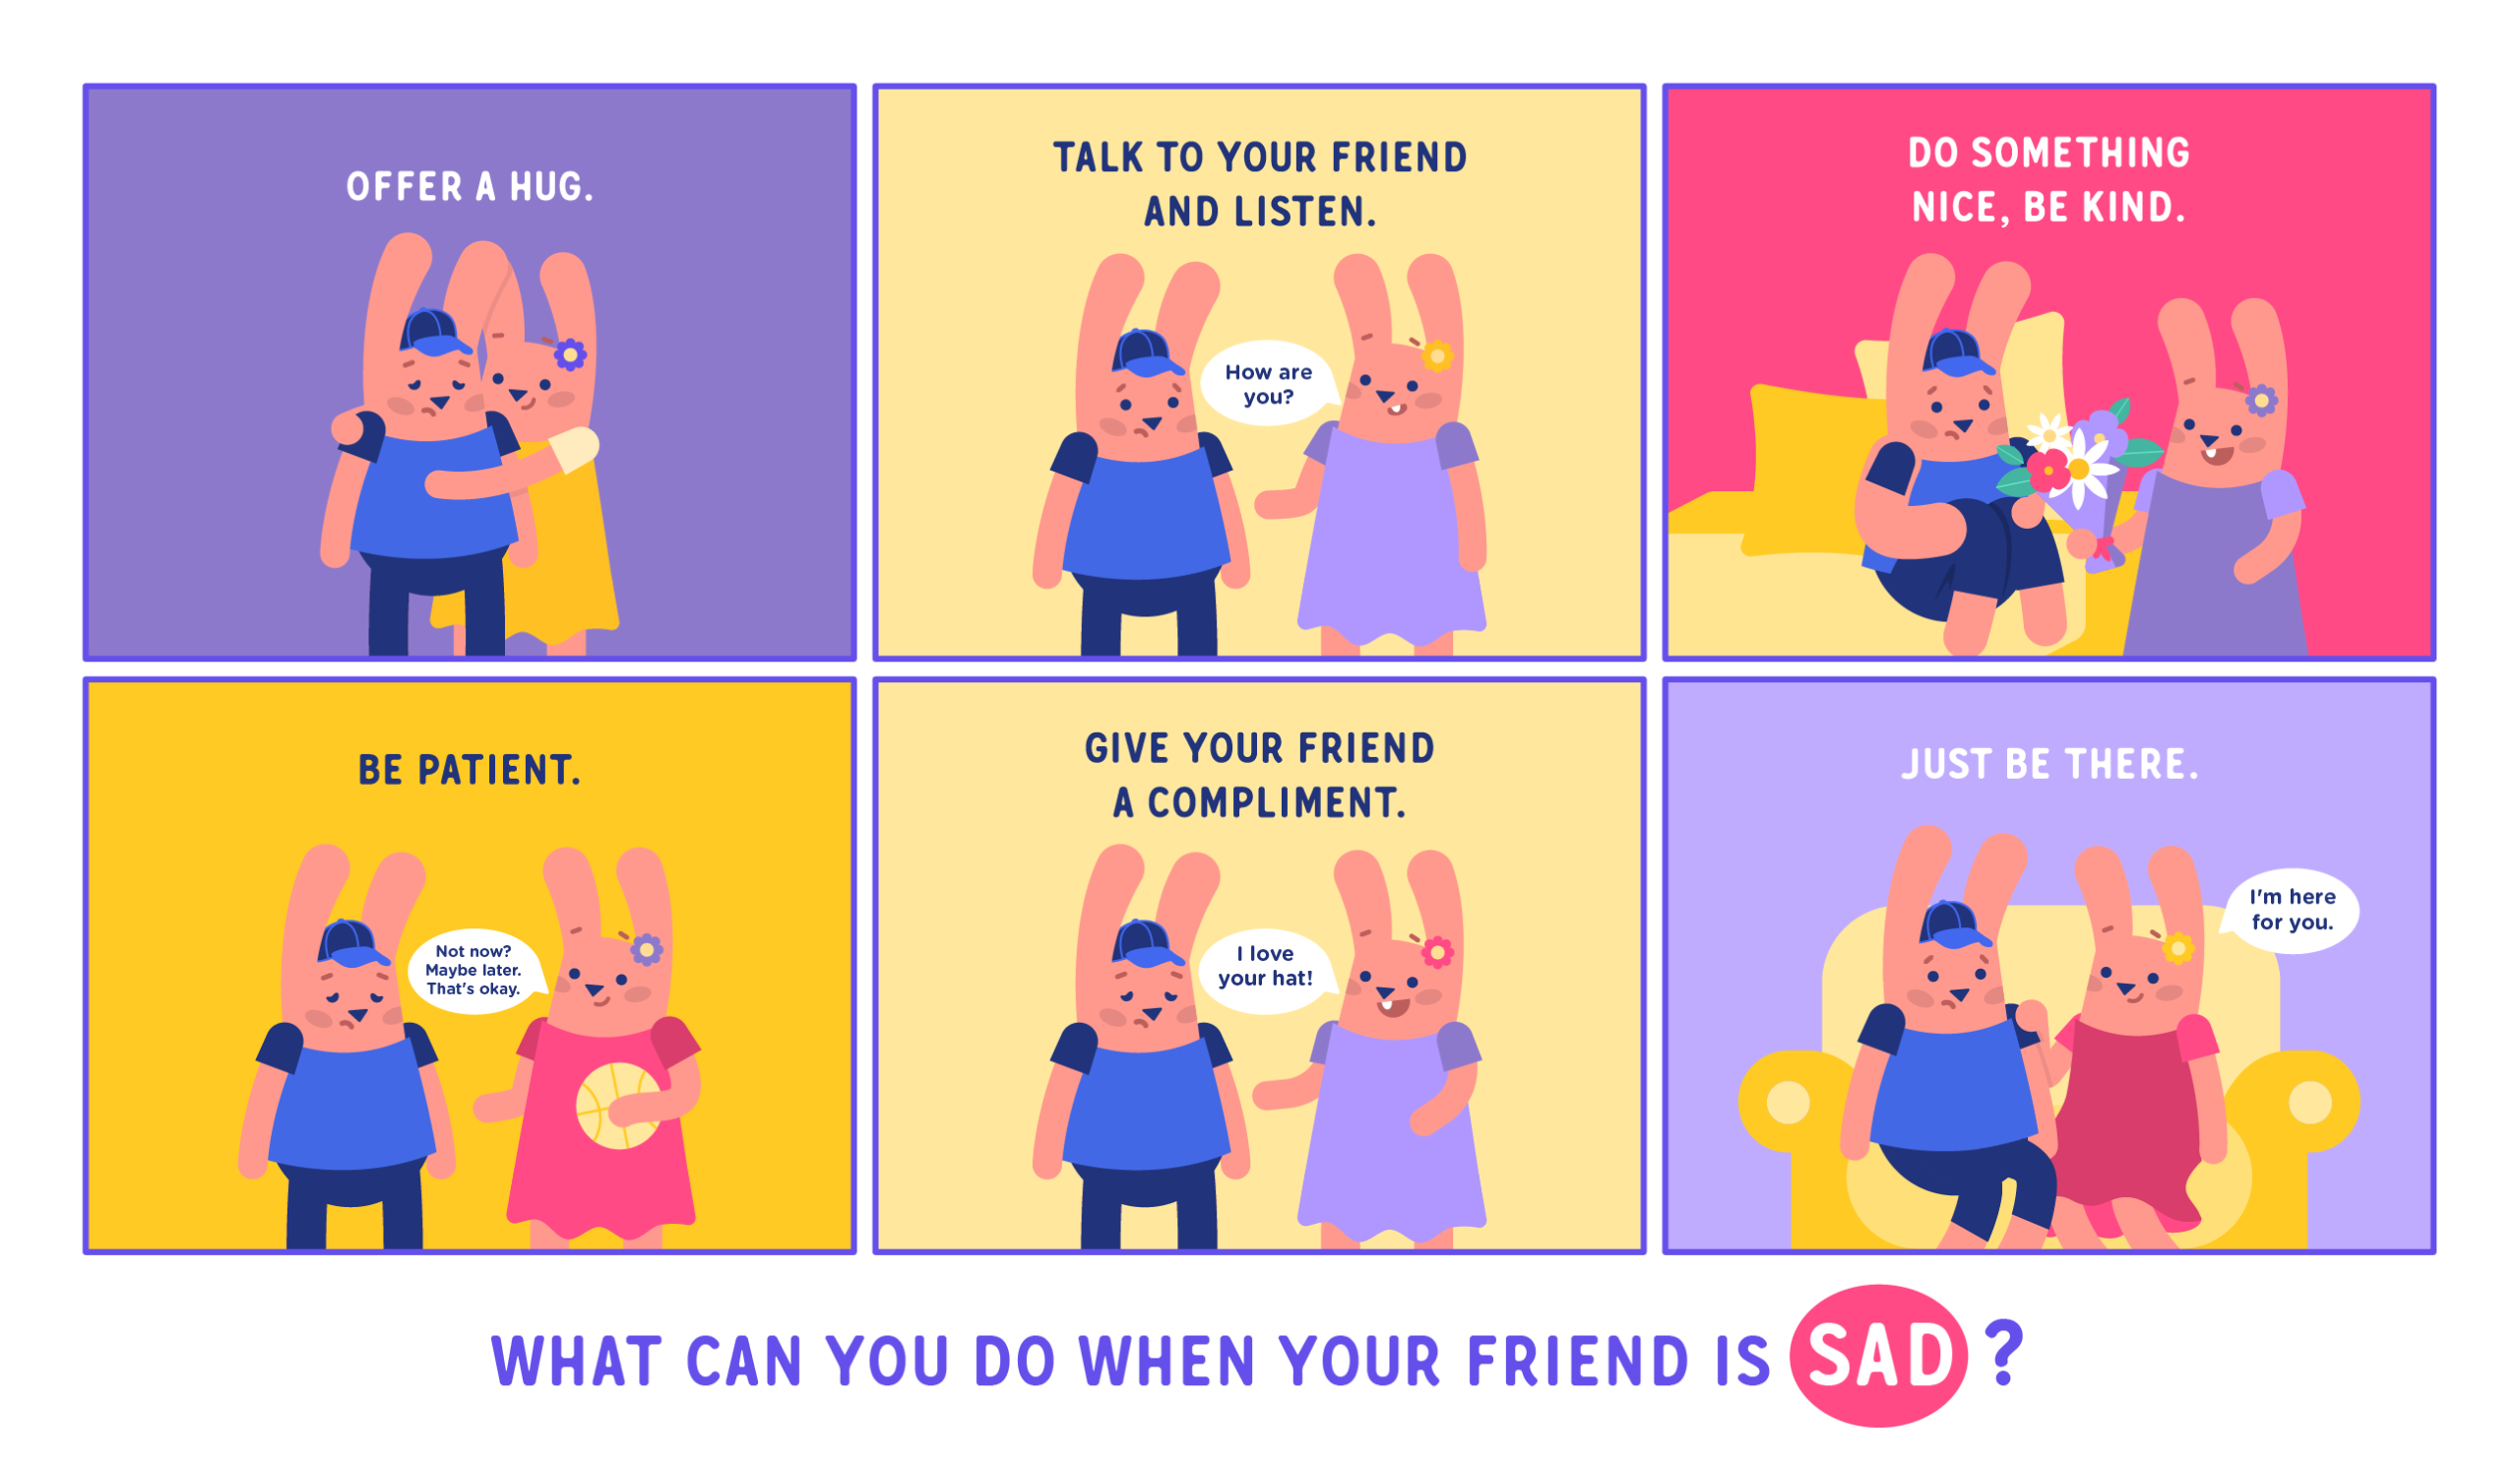 How to help your friend when they are sad